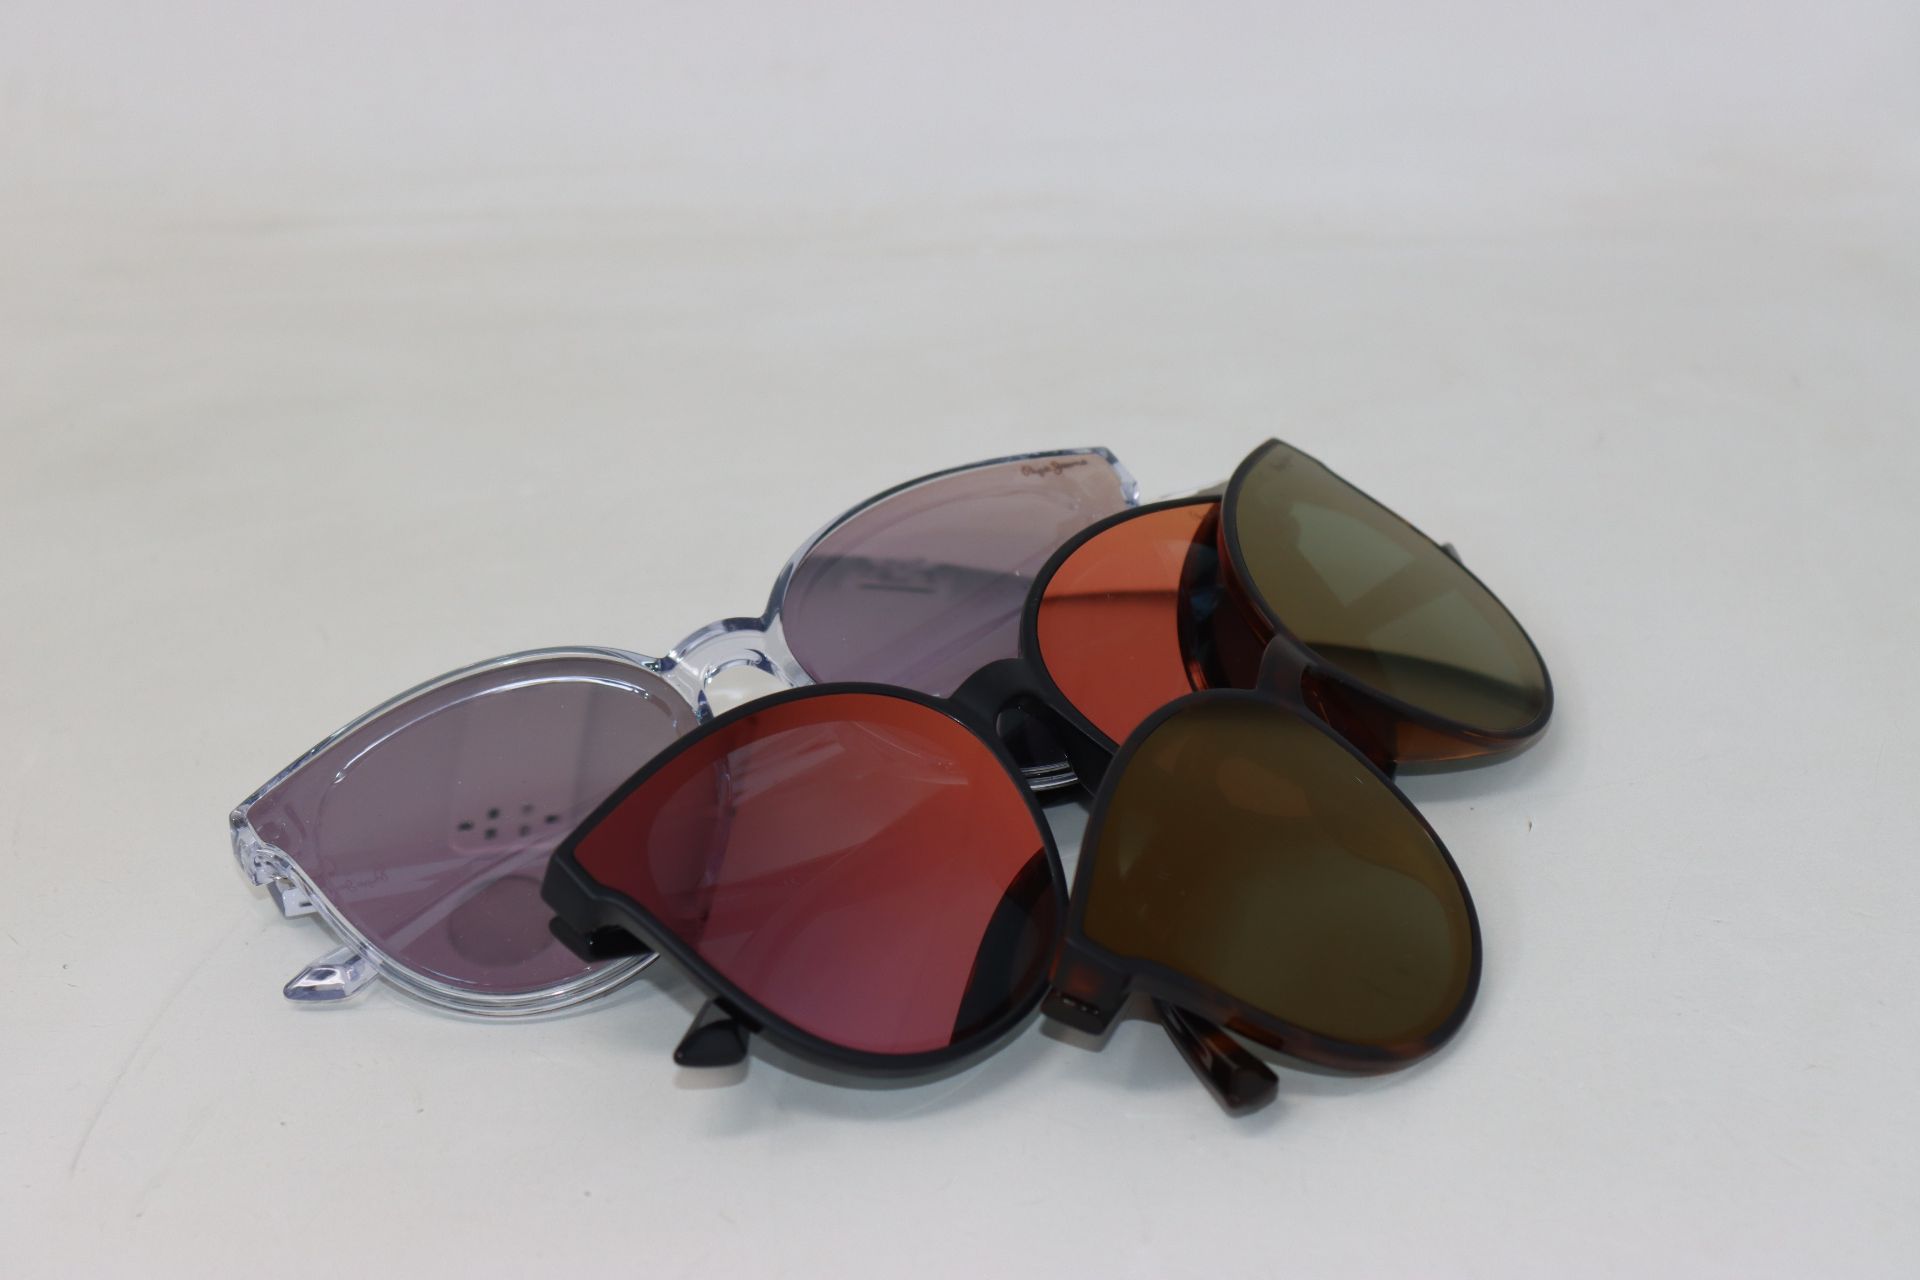 Three pair of as new Pepe Jeans Nevaeh sunglasses (No cases).